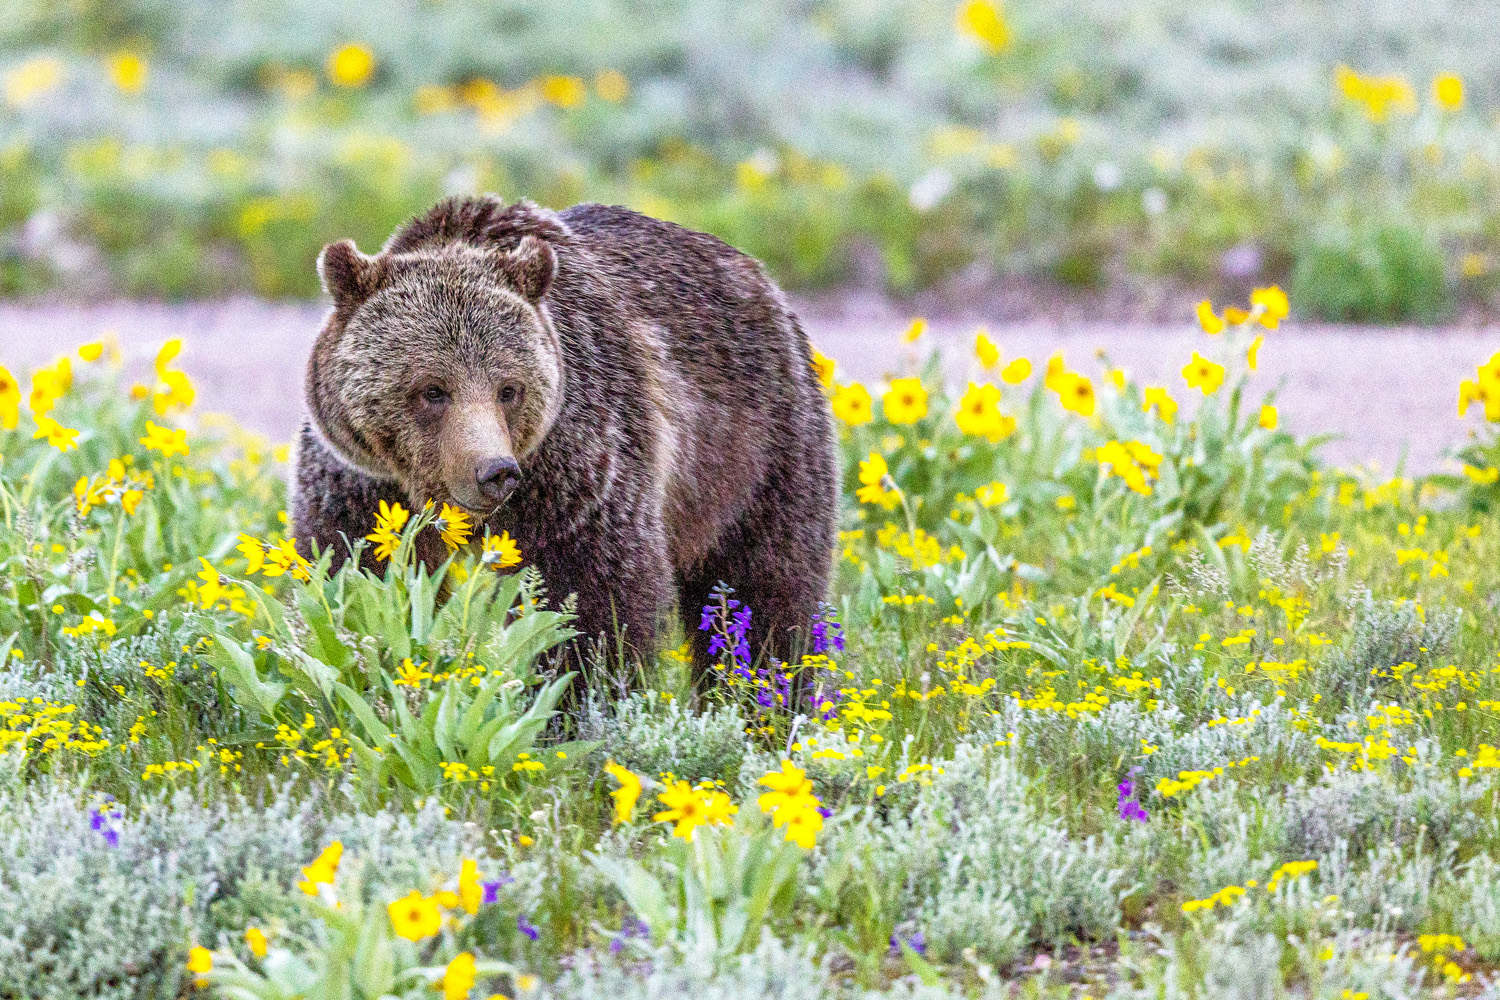 The grizzlies of Grand Teton National Park are stunning in early spring as they graze among the countless flowers that quickly...